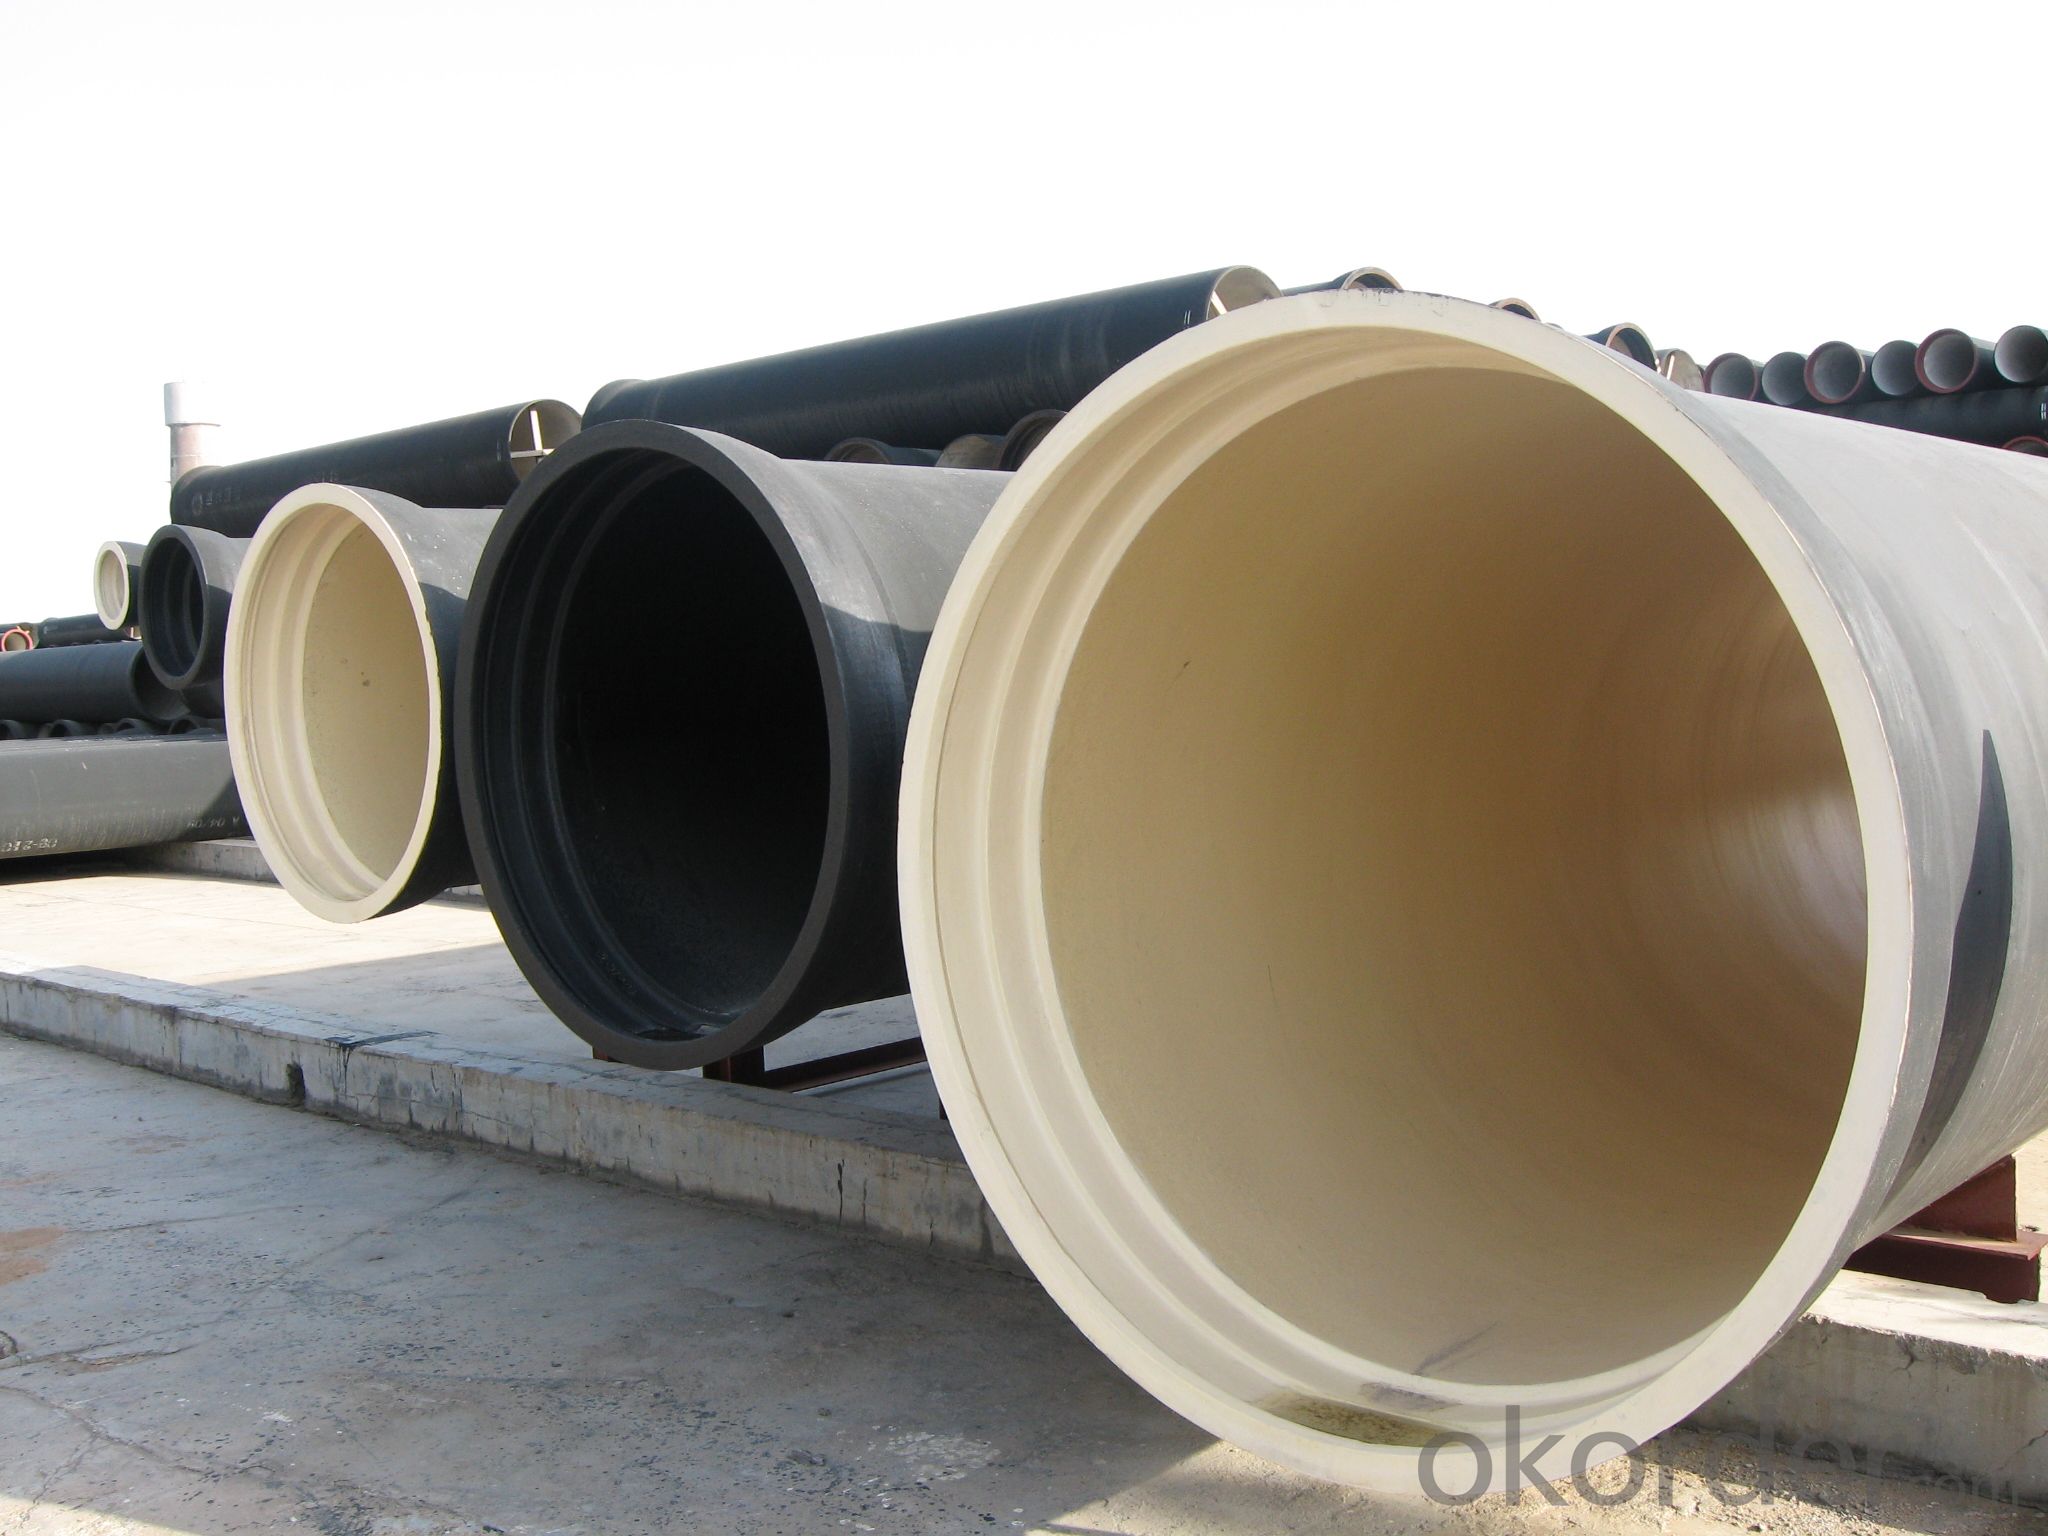 Ductile Iron Pipe DN1800 real-time quotes, last-sale prices -Okorder.com